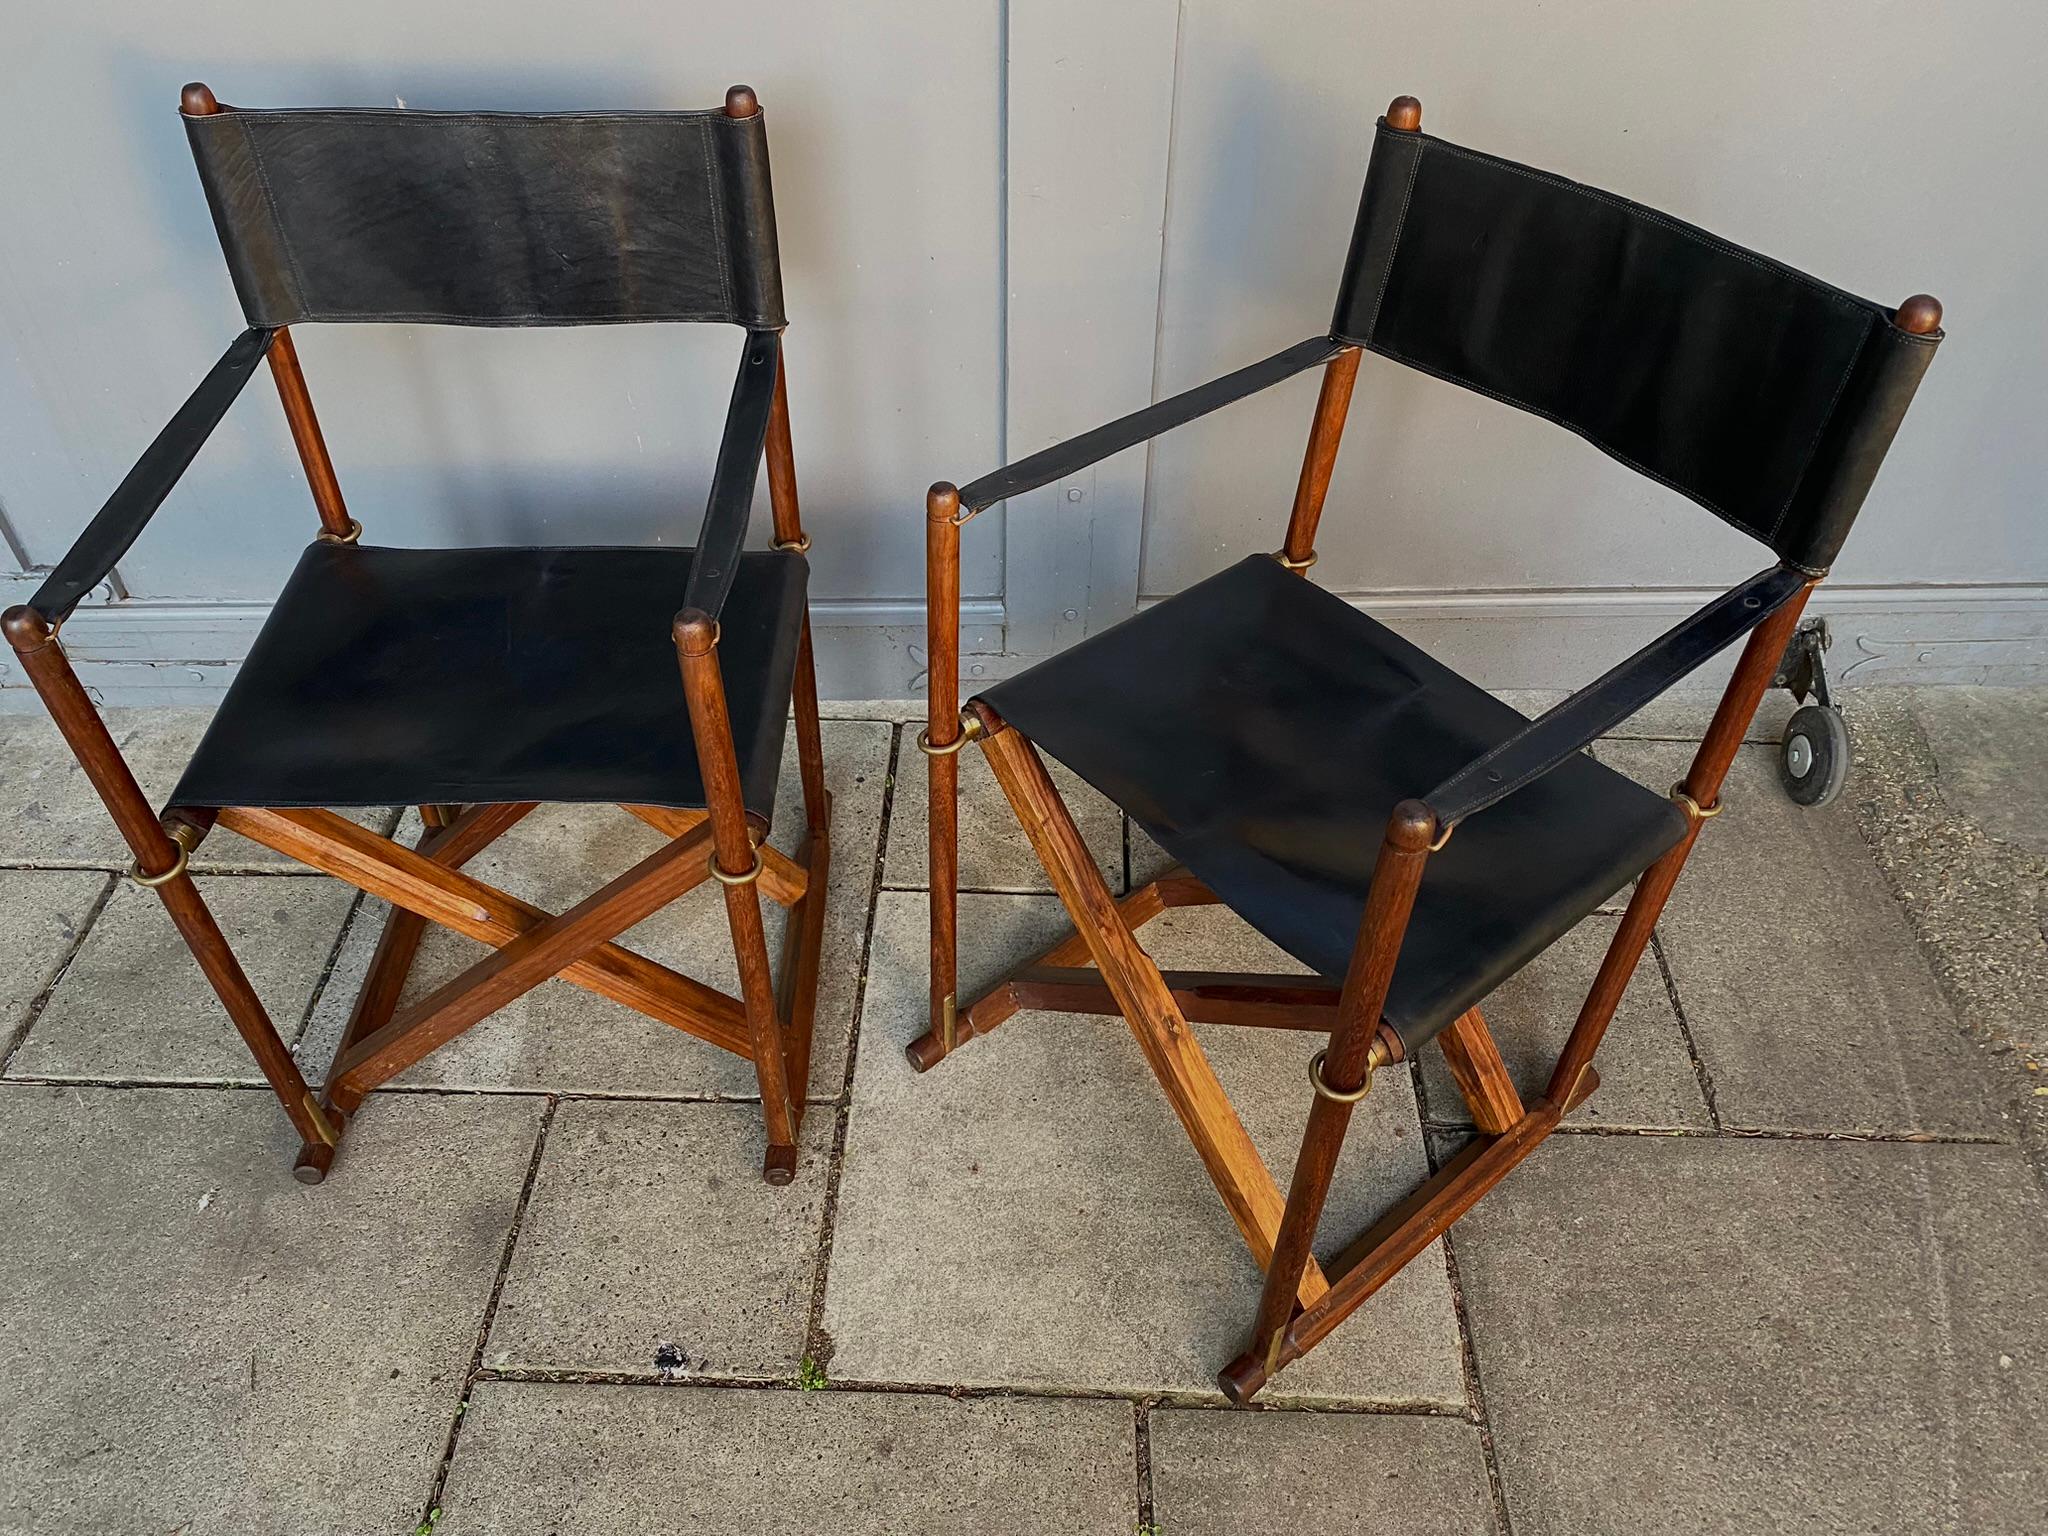 Mid Century Pair of Mogens Koch ‘Mk-16’ Safari Chair, Folding Directors chair, Danish, 1970s

Pair of vintage leather & teak folding Safari Chairs, Model ‘MK 16 Safari’ originally designed by Mogens Koch in 1932, reproduced by various companies over